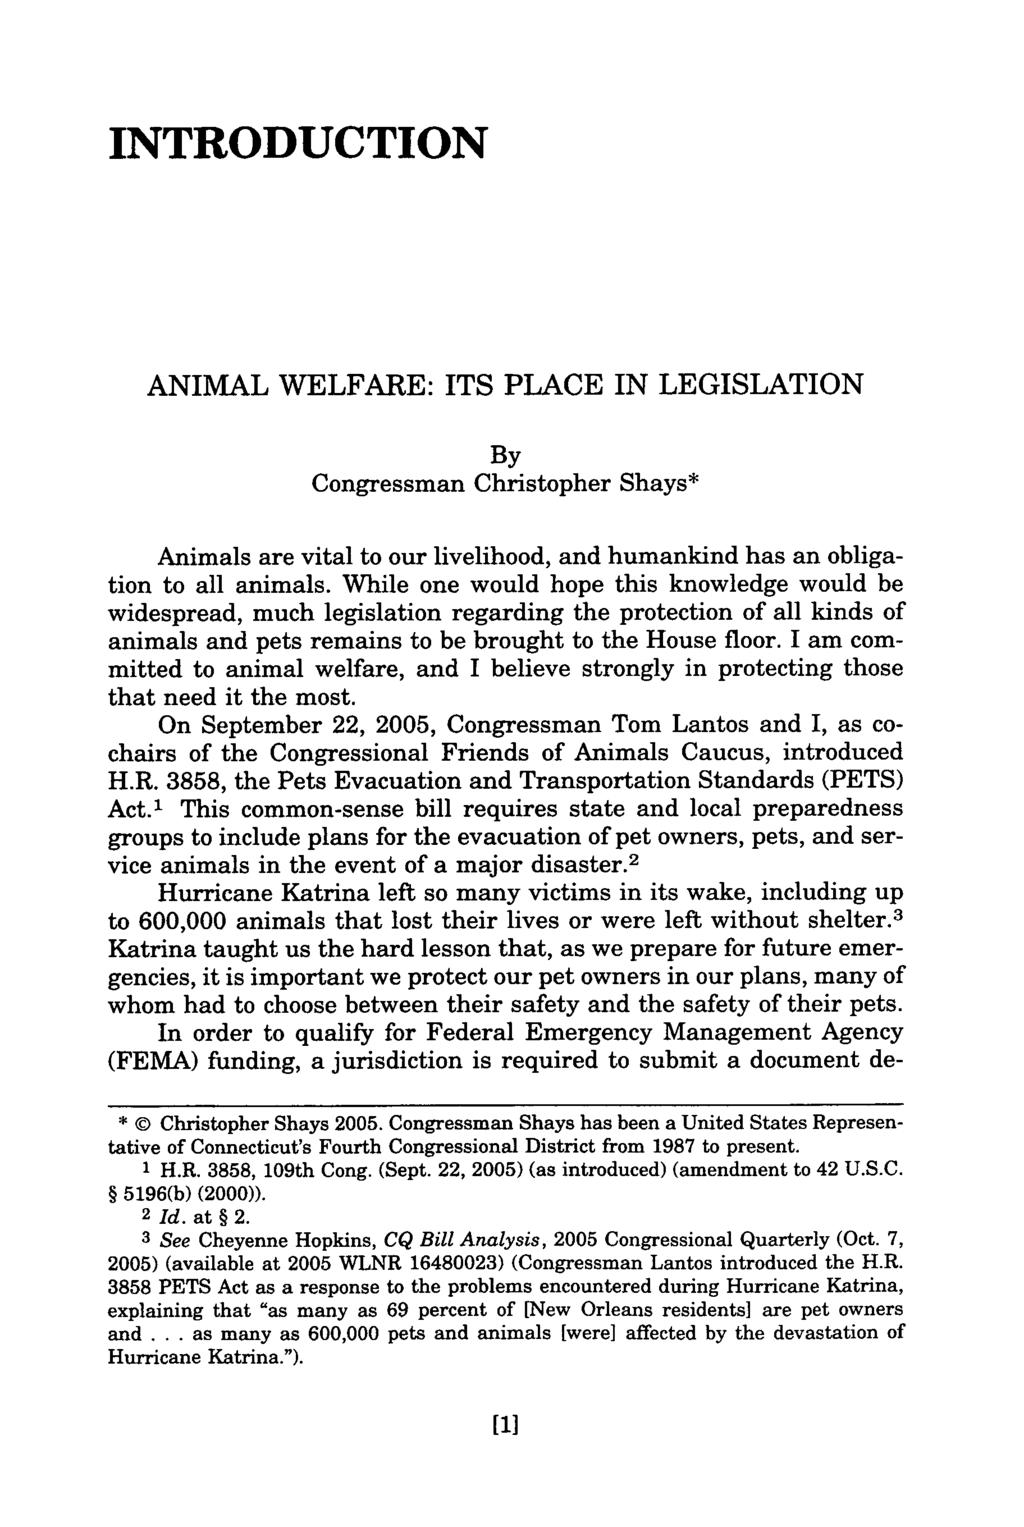 INTRODUCTION ANIMAL WELFARE: ITS PLACE IN LEGISLATION By Congressman Christopher Shays* Animals are vital to our livelihood, and humankind has an obligation to all animals.